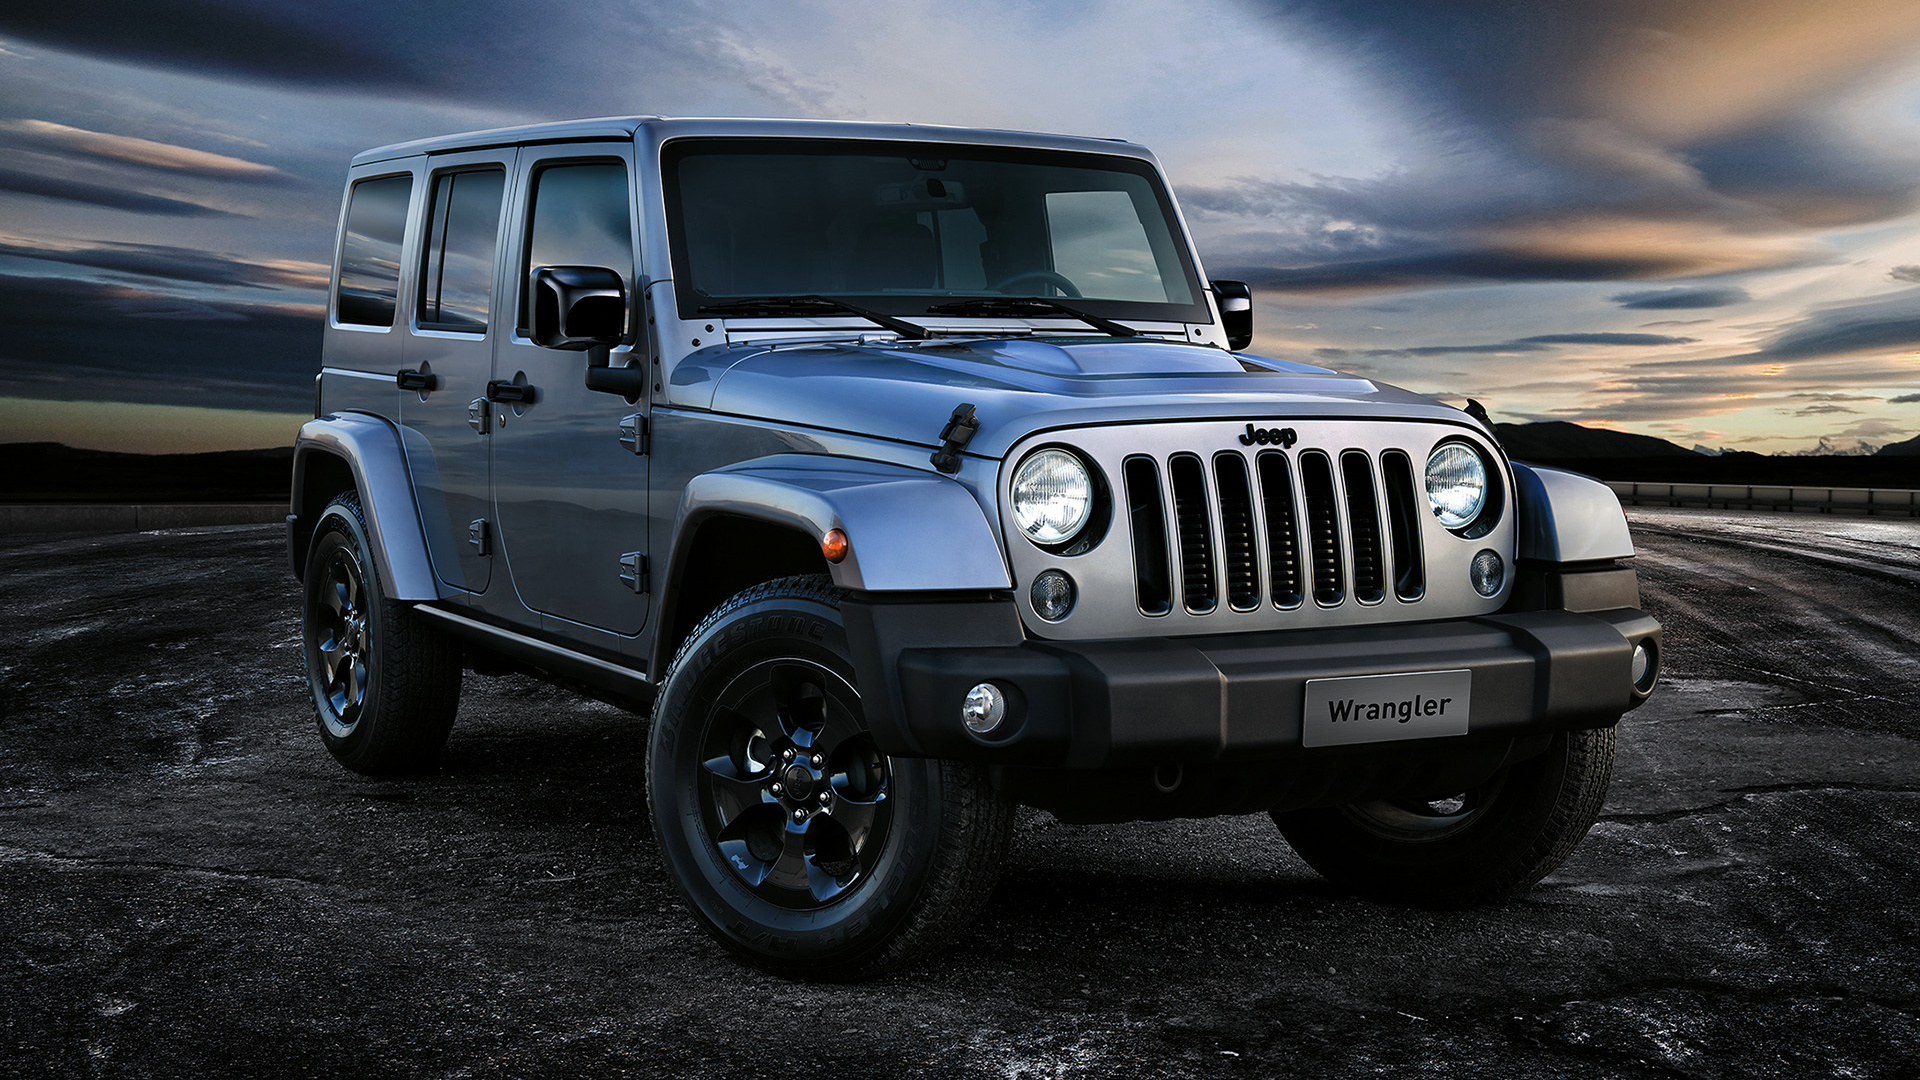 2015 Jeep Wrangler Unlimited Black Edition Ii Wallpapers And Hd